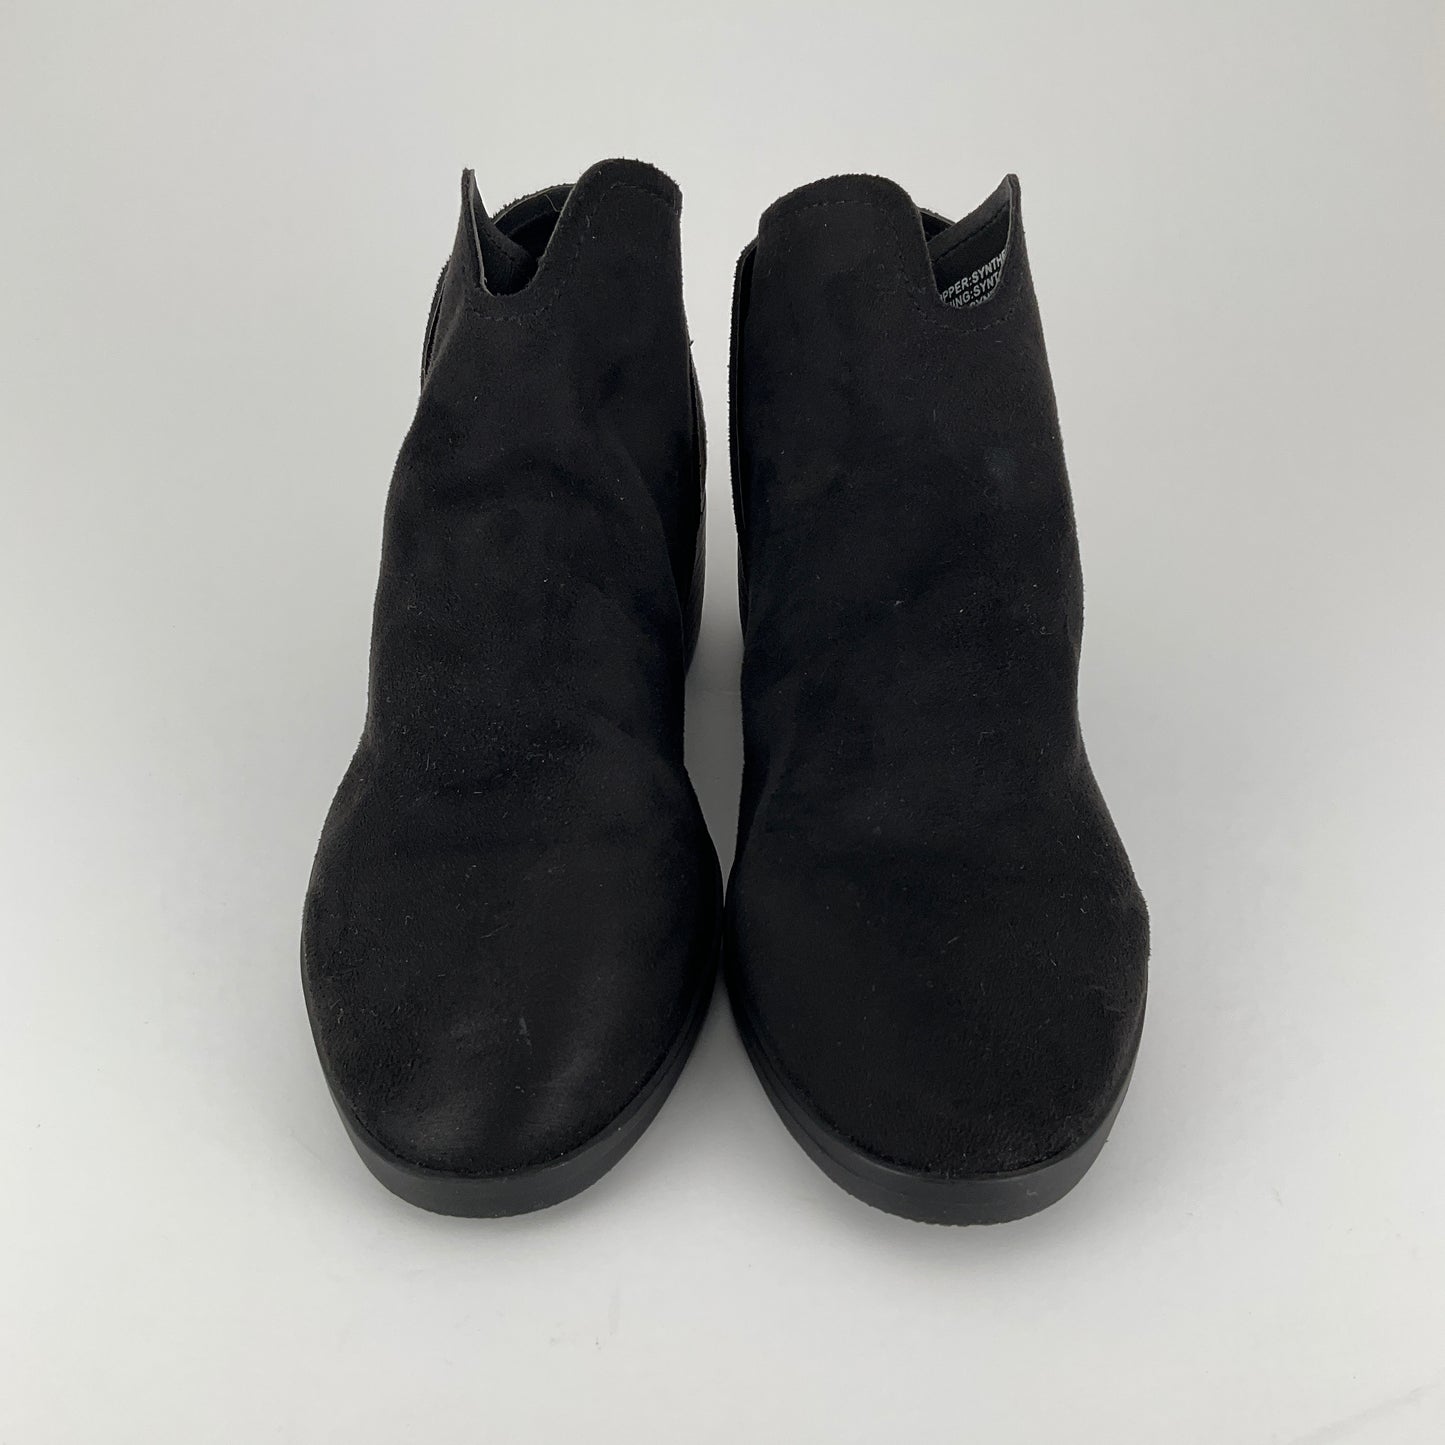 Celebrity -Ankle Boots - Size 6